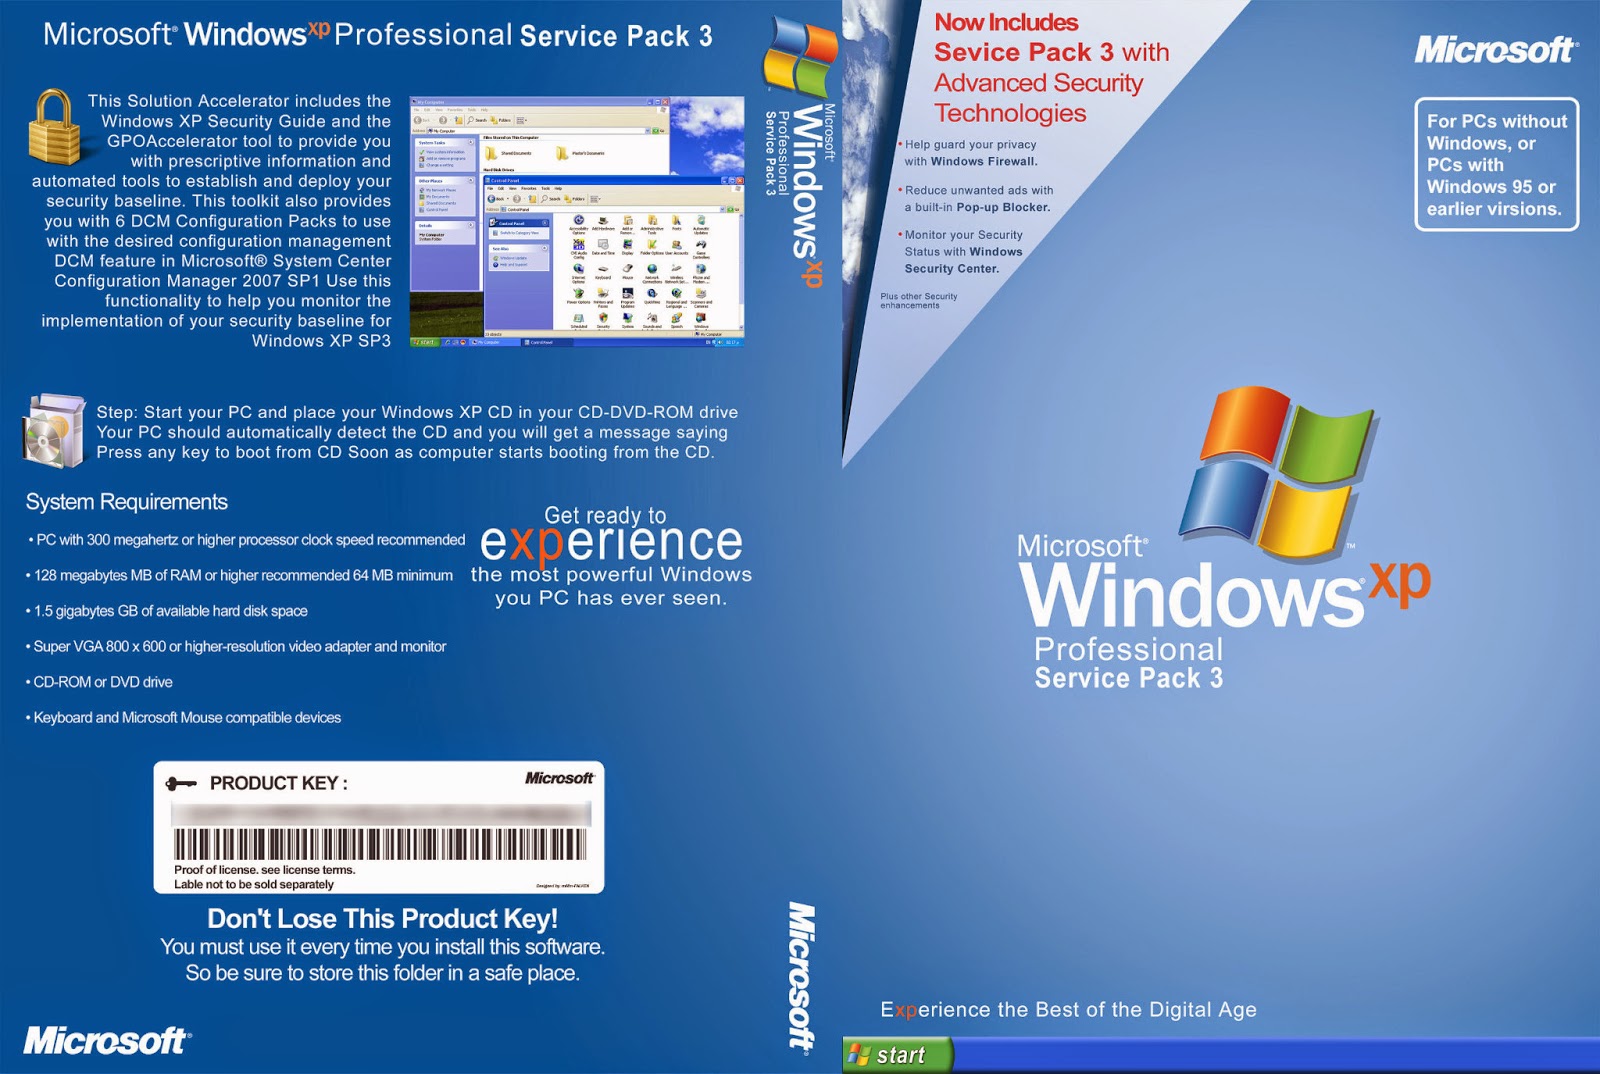 windows 7 service pack 2 iso image download